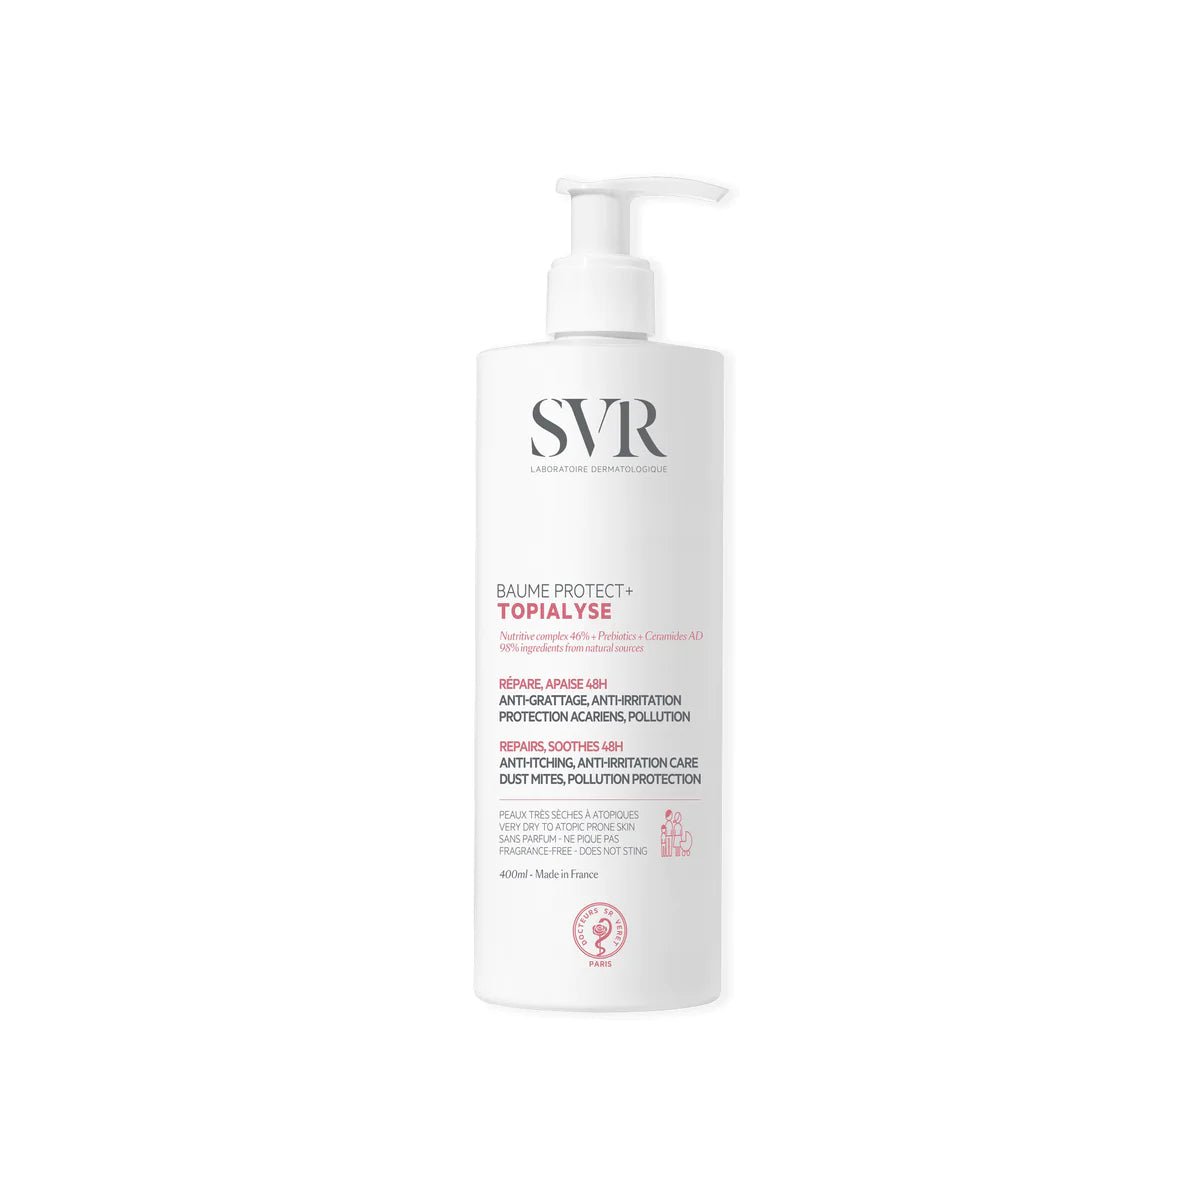 SVR TOPIALYSE Baume Protect+ Soothing and Moisturising Intensive Balm - La Para London